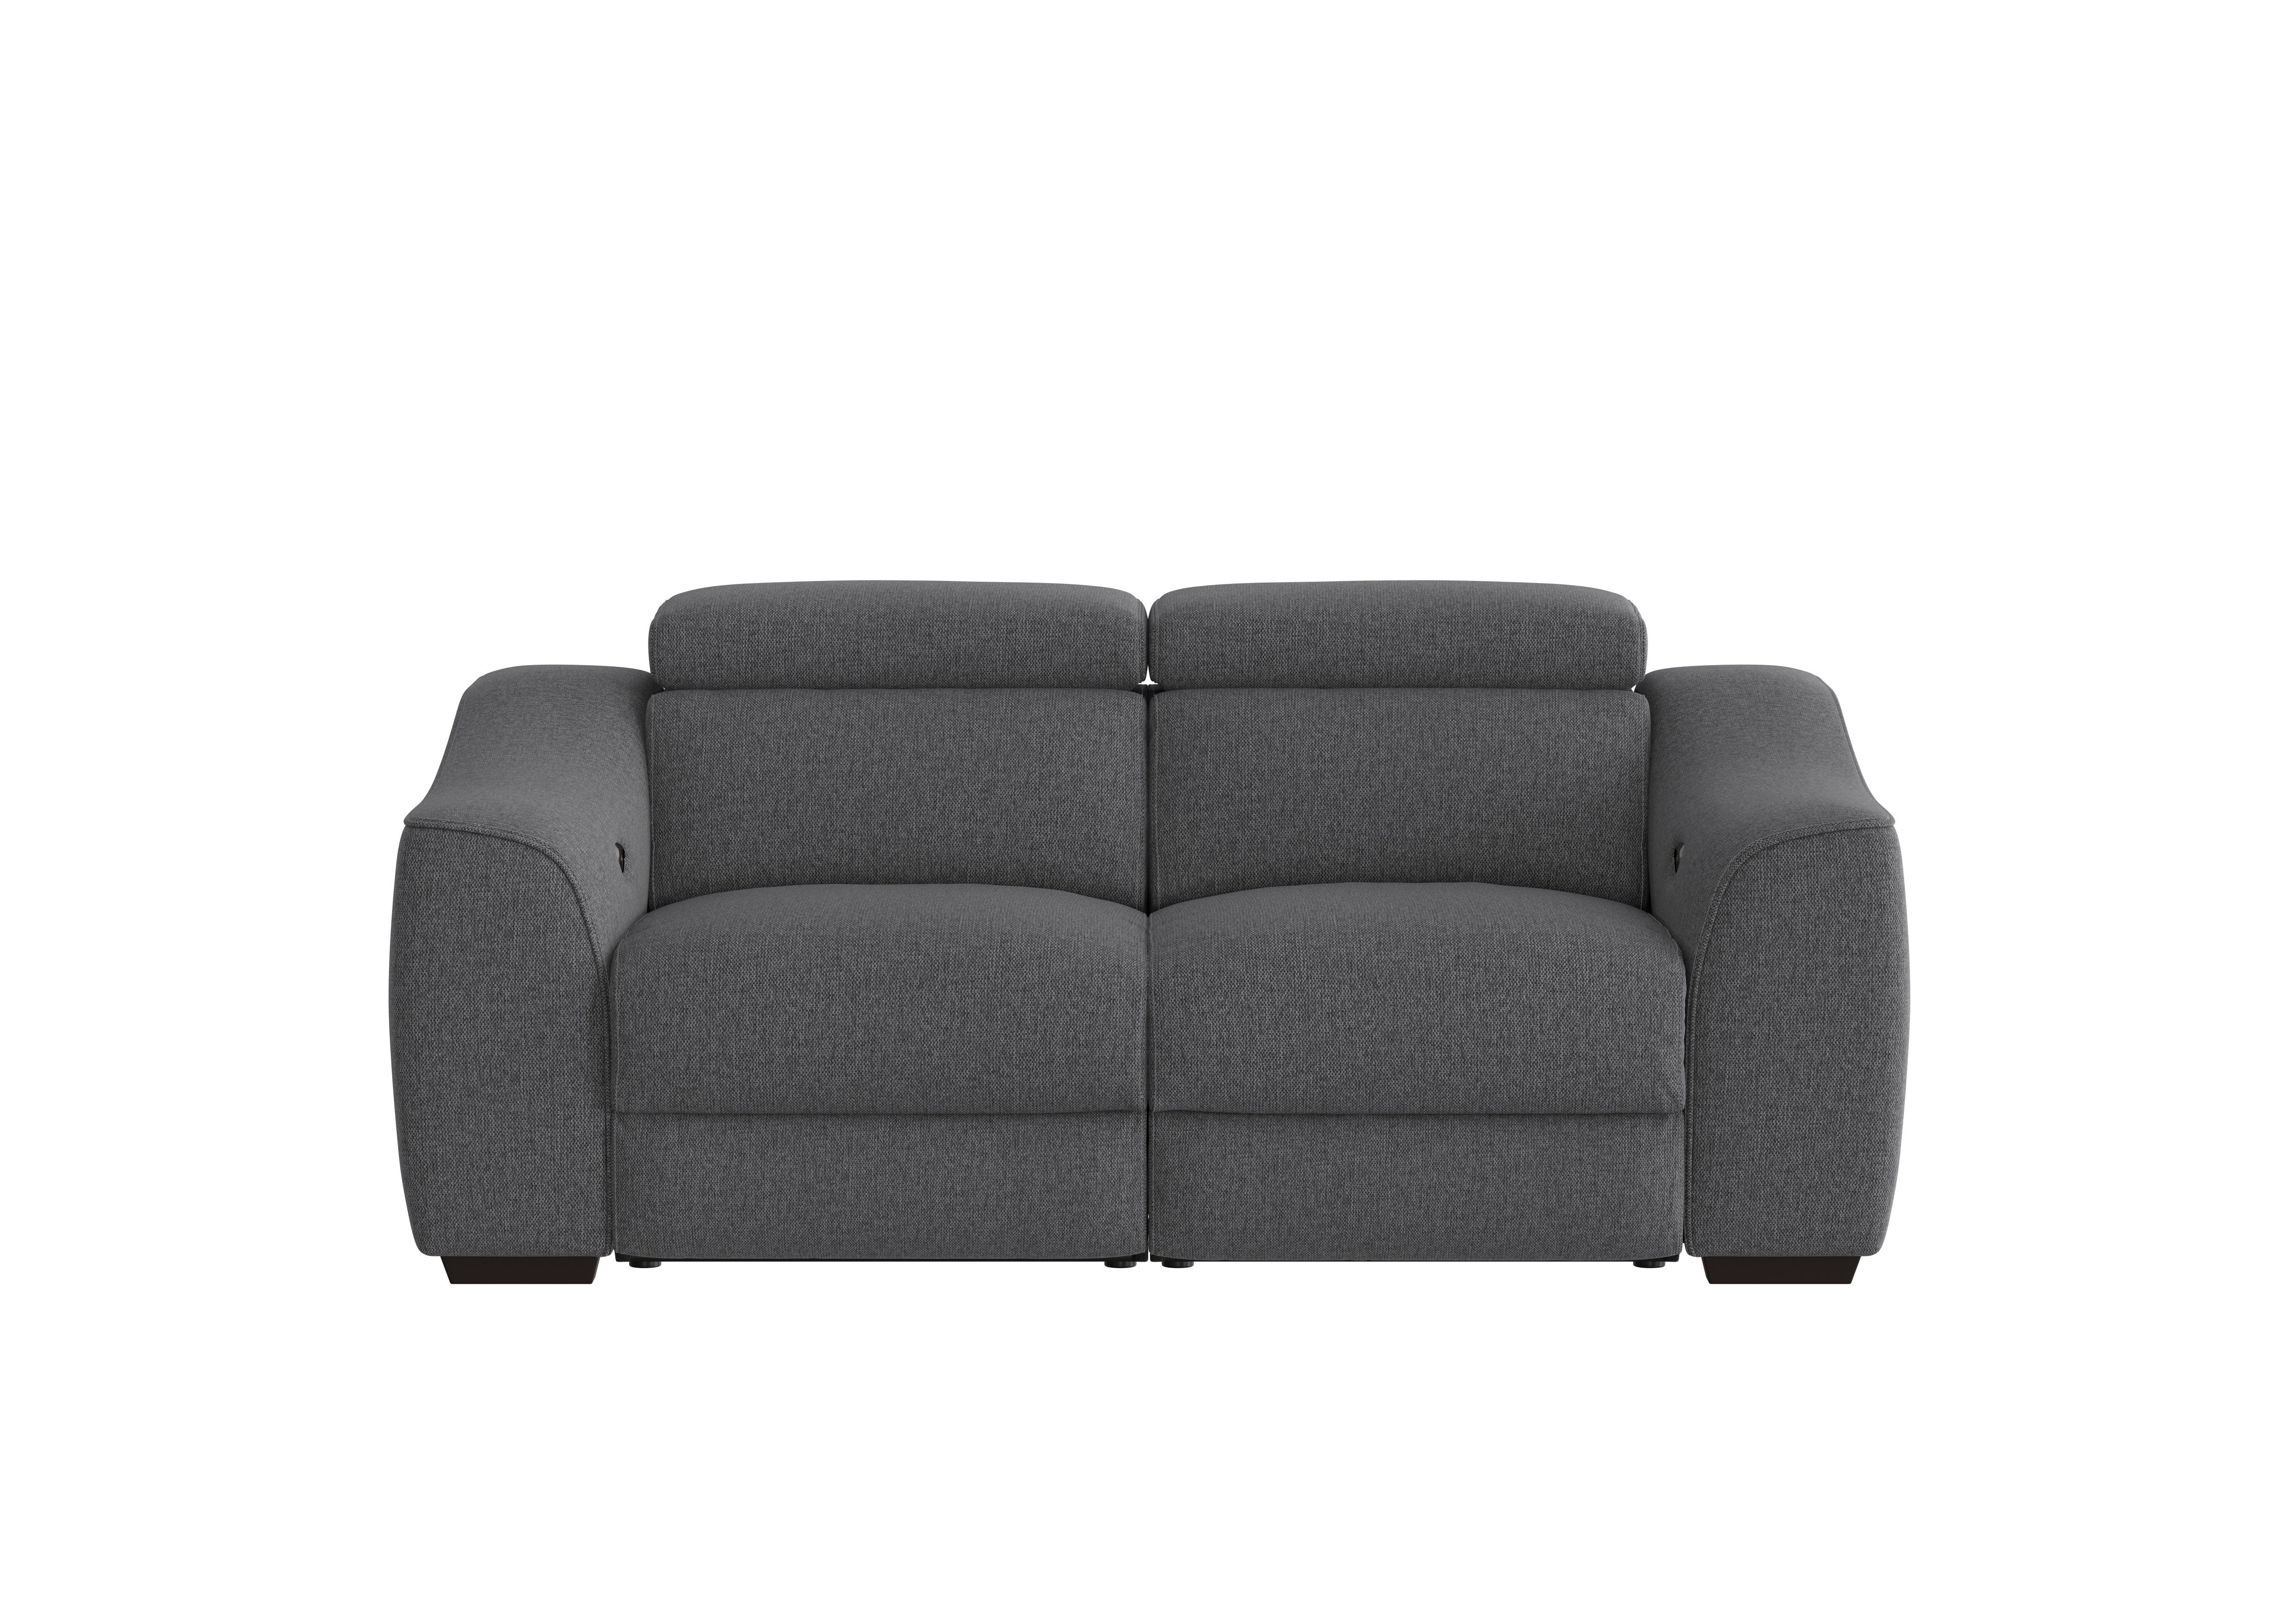 Elixir 2 Seater Fabric Sofa in Fab-Blt-R39 Charcoal on Furniture Village